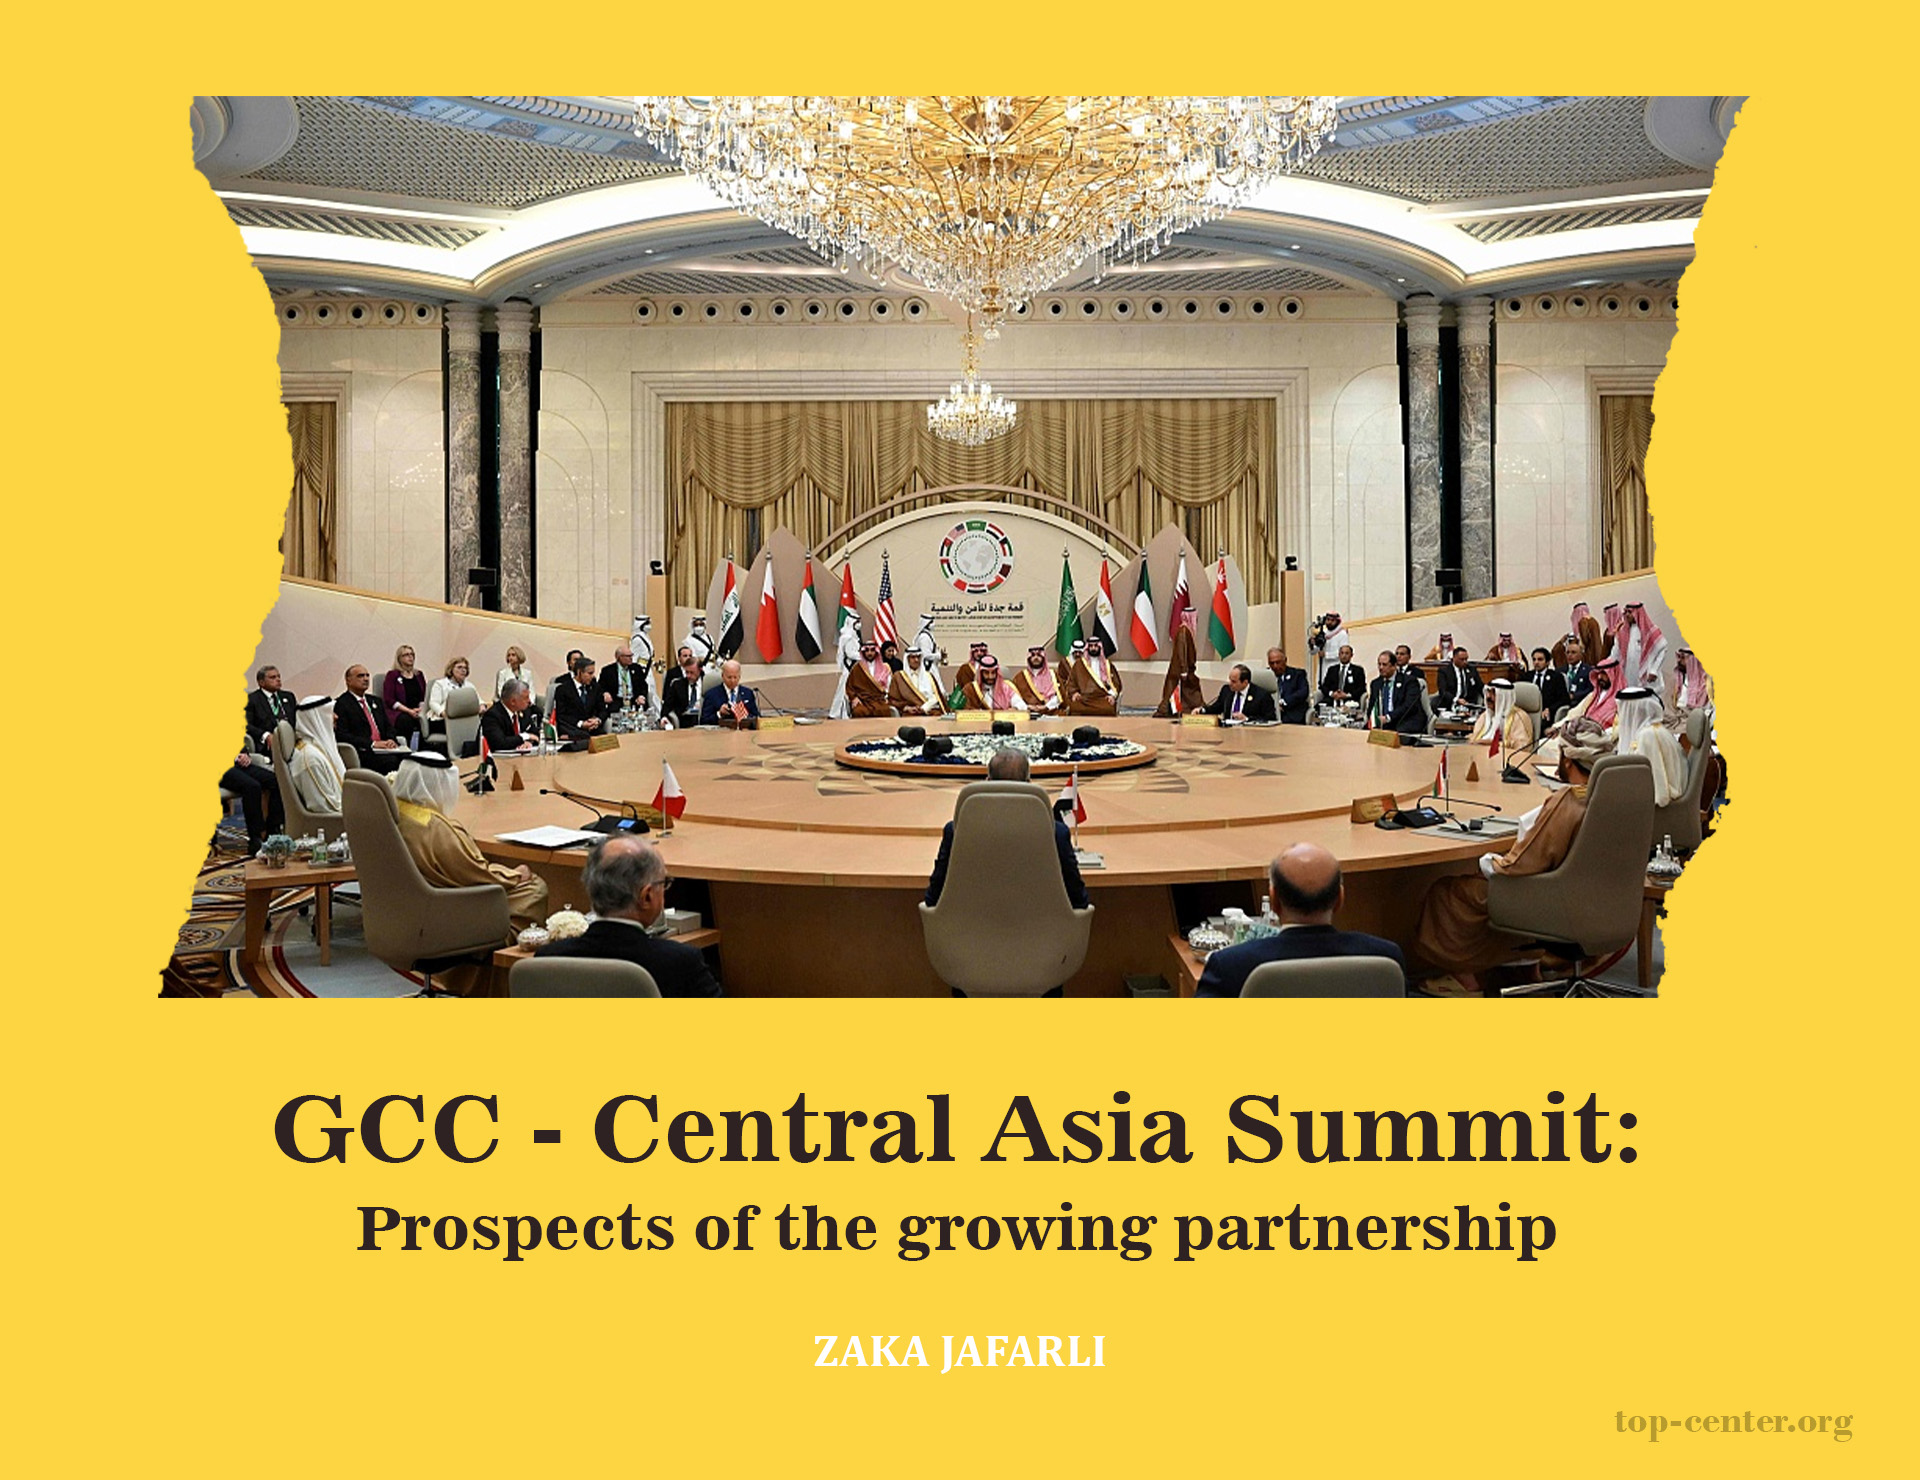 GCC - Central Asia Summit: Prospects of the growing partnership